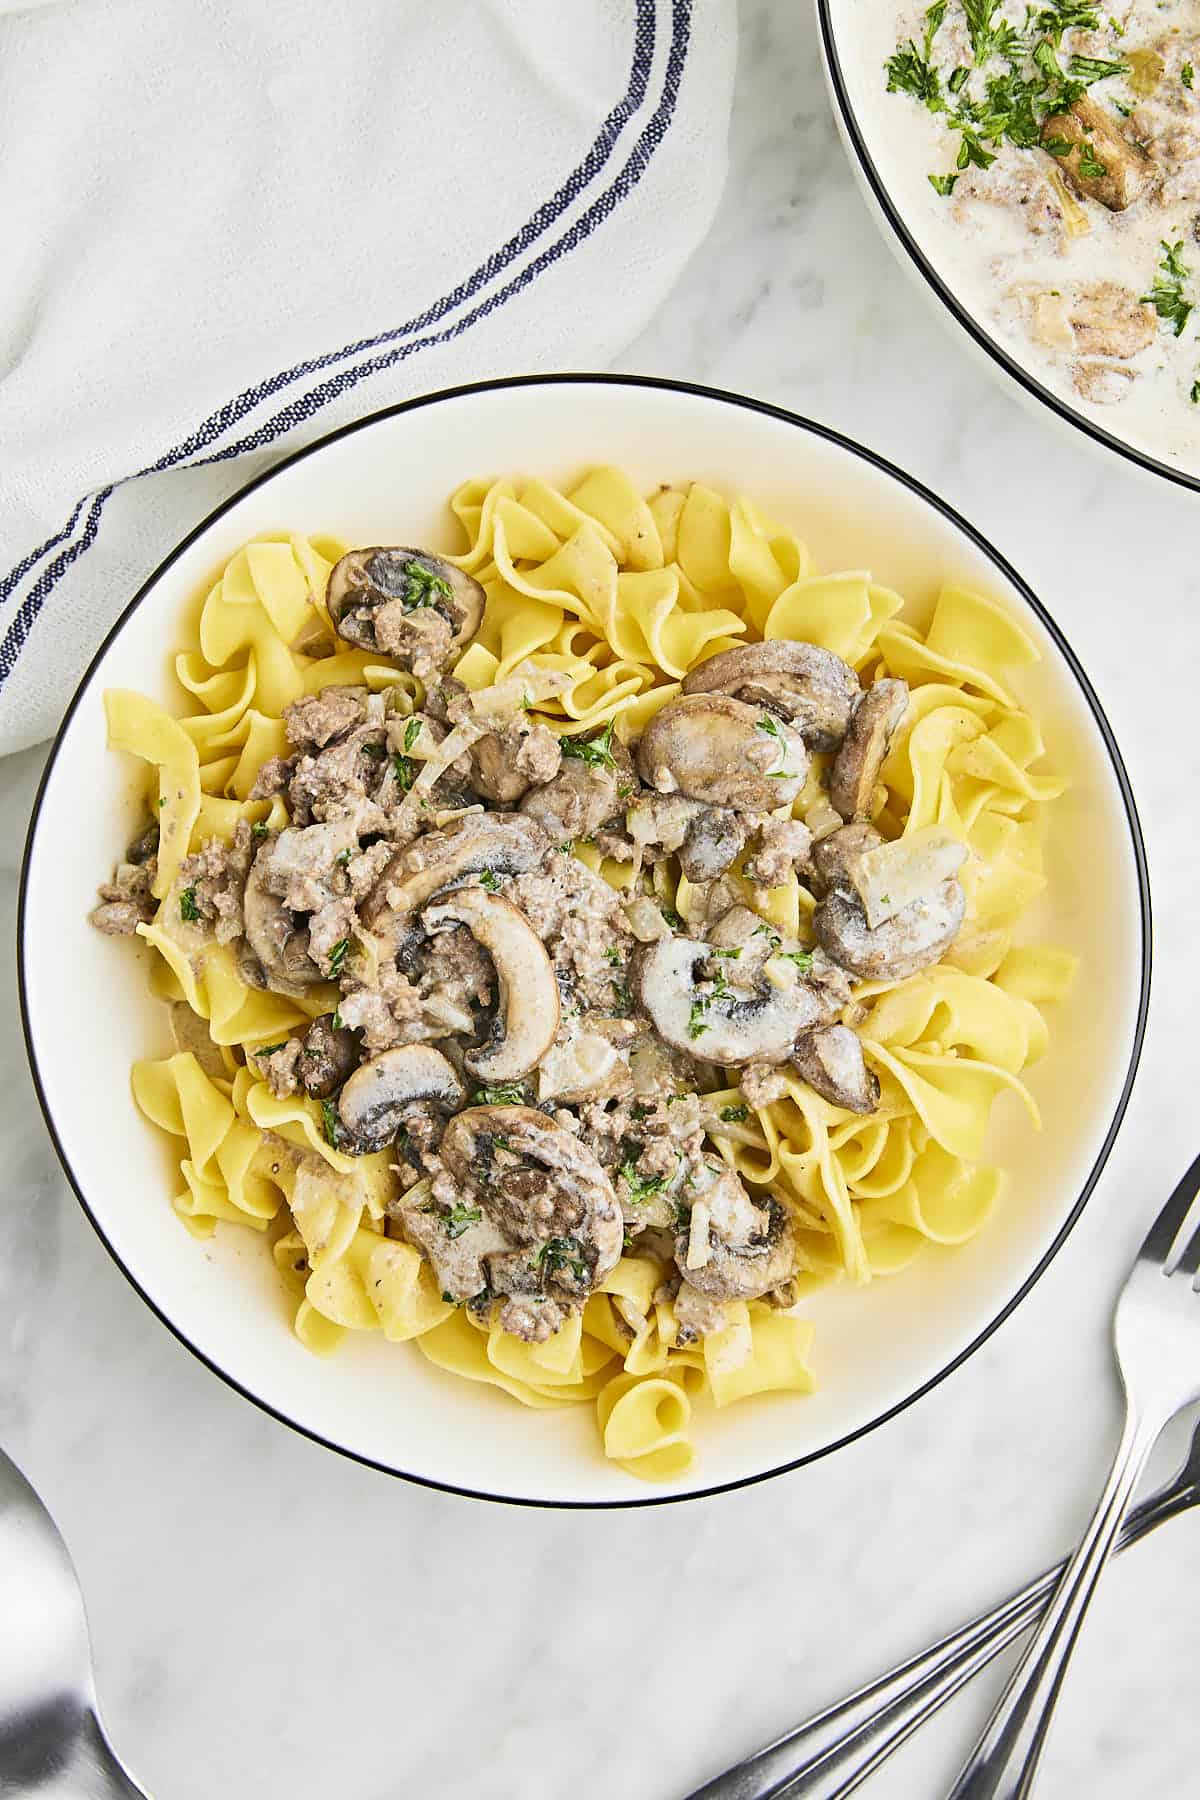 Ground Beef Stroganoff served over tender egg noodles and garnished with parsely.